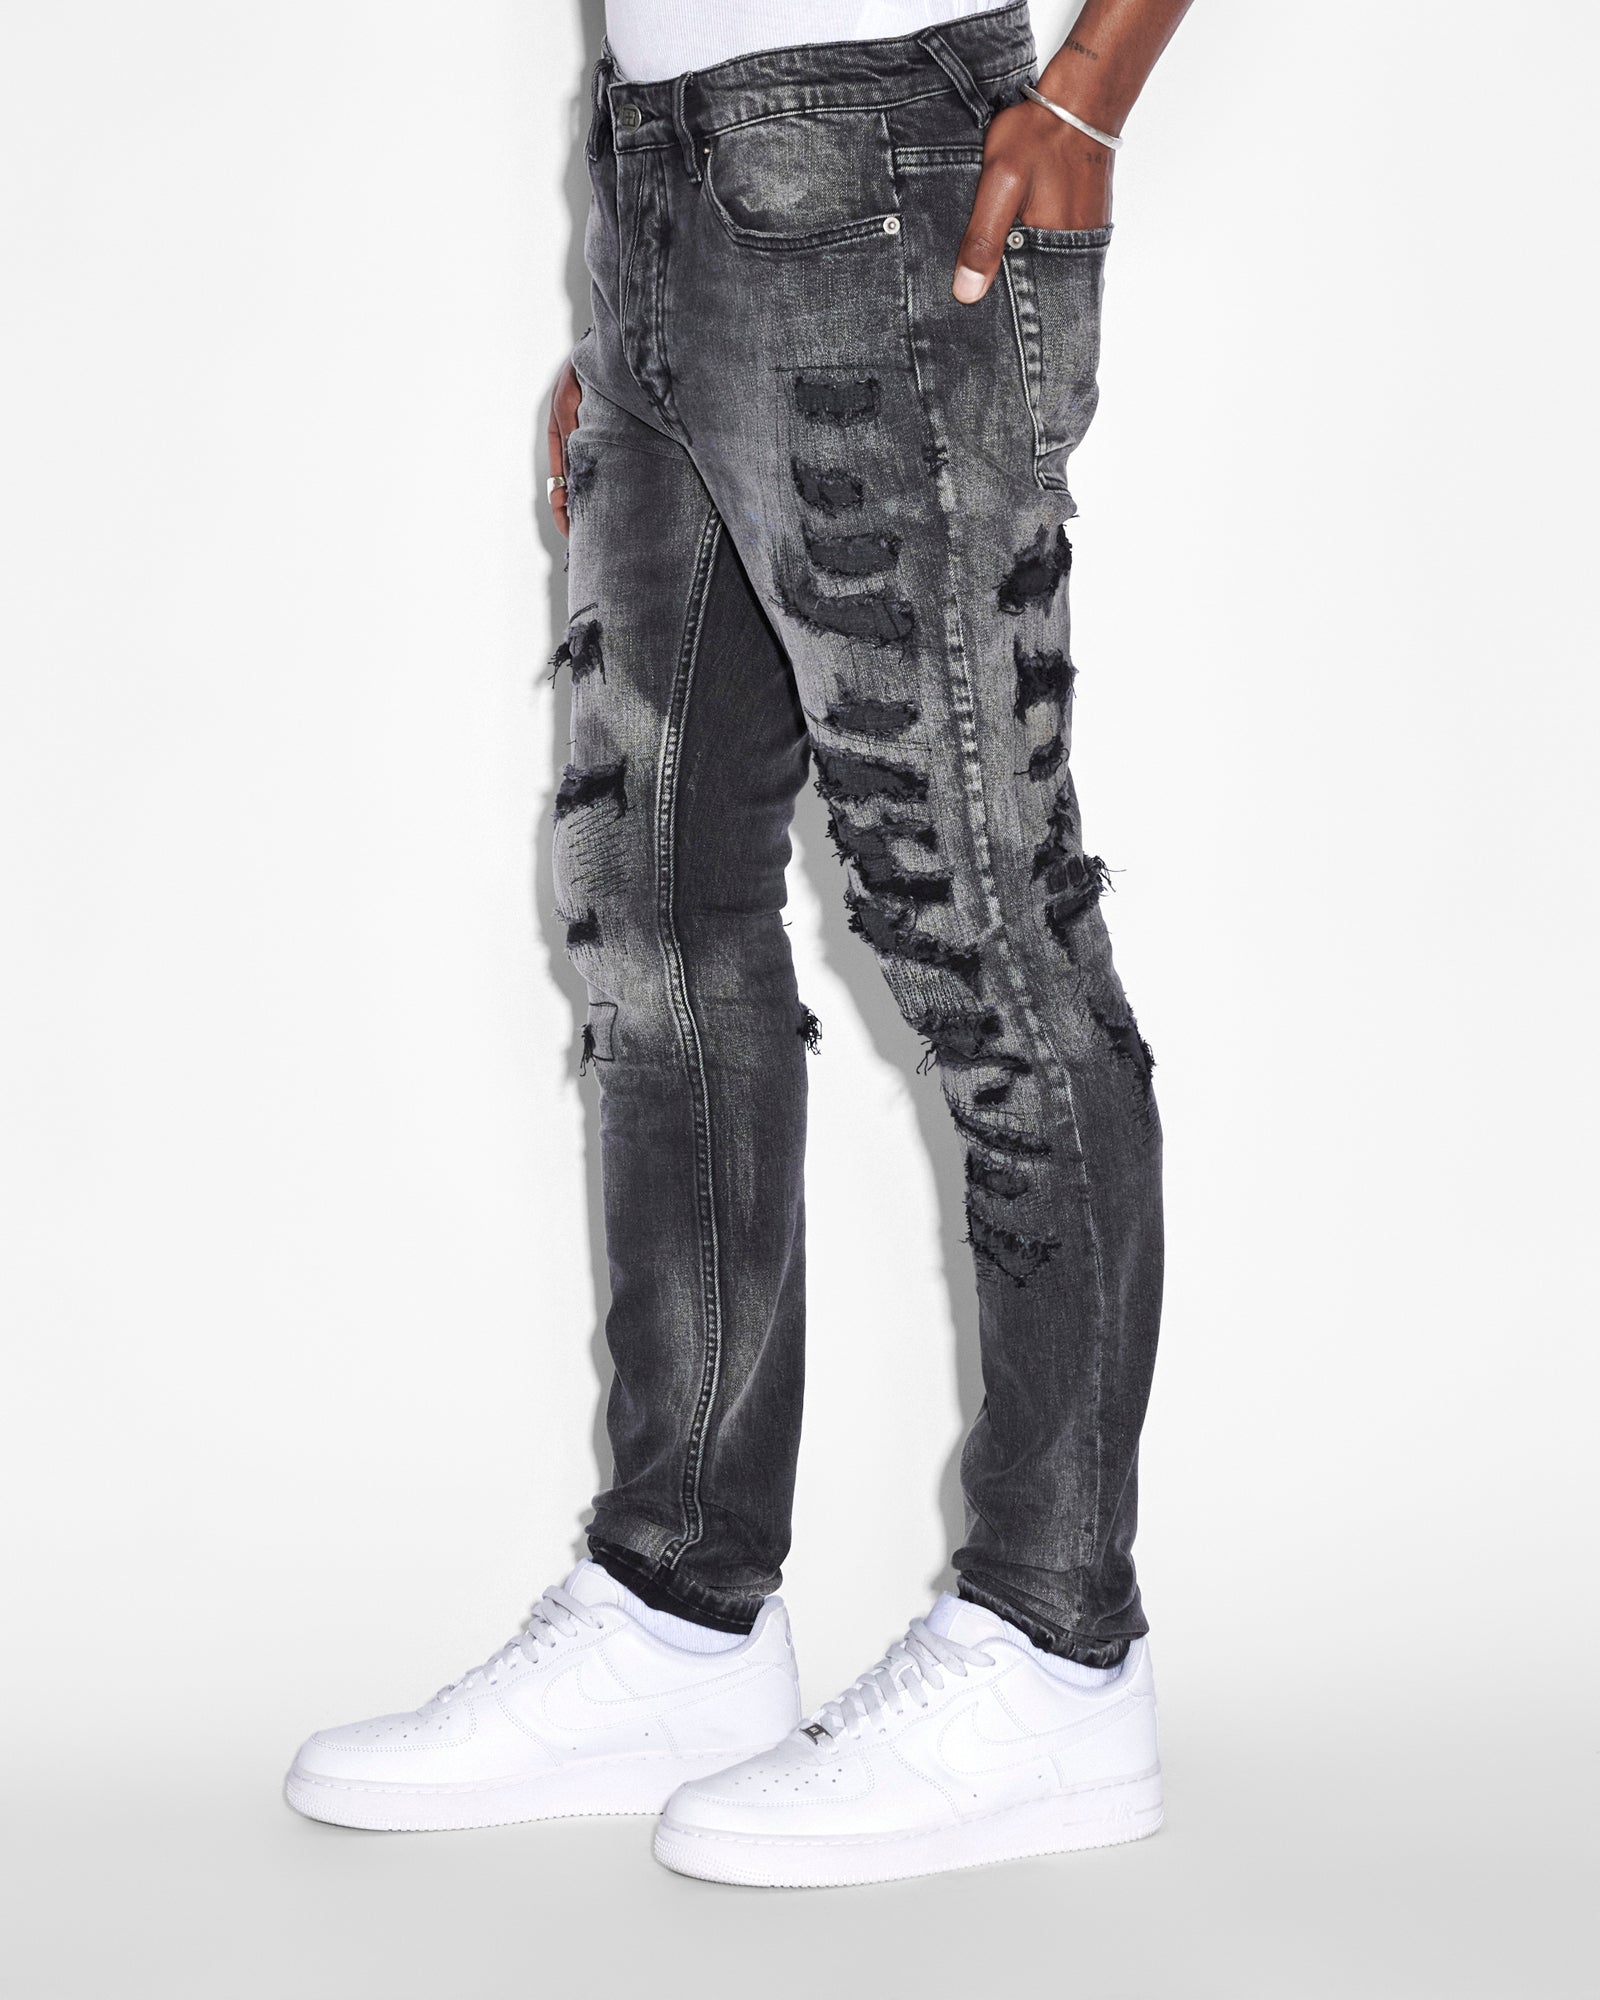 YYDGH On Clearance Mens Stretch Skinny Ripped Distressed Biker